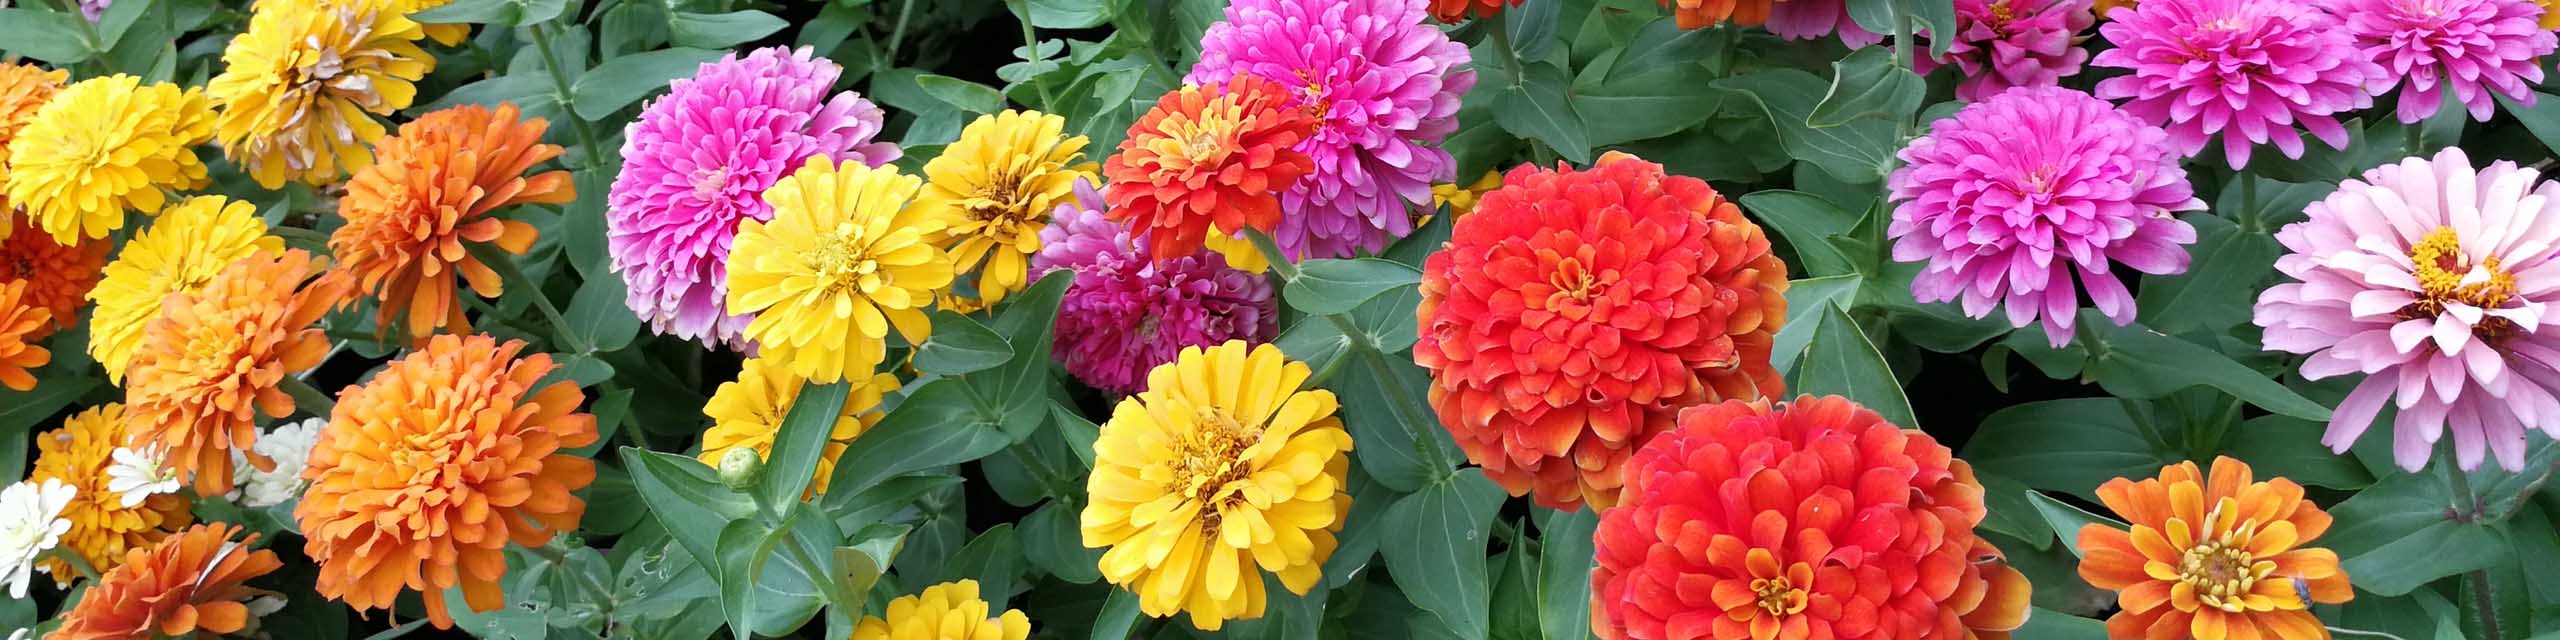 A mass planting of zinnia flowers with different colors of blooms.